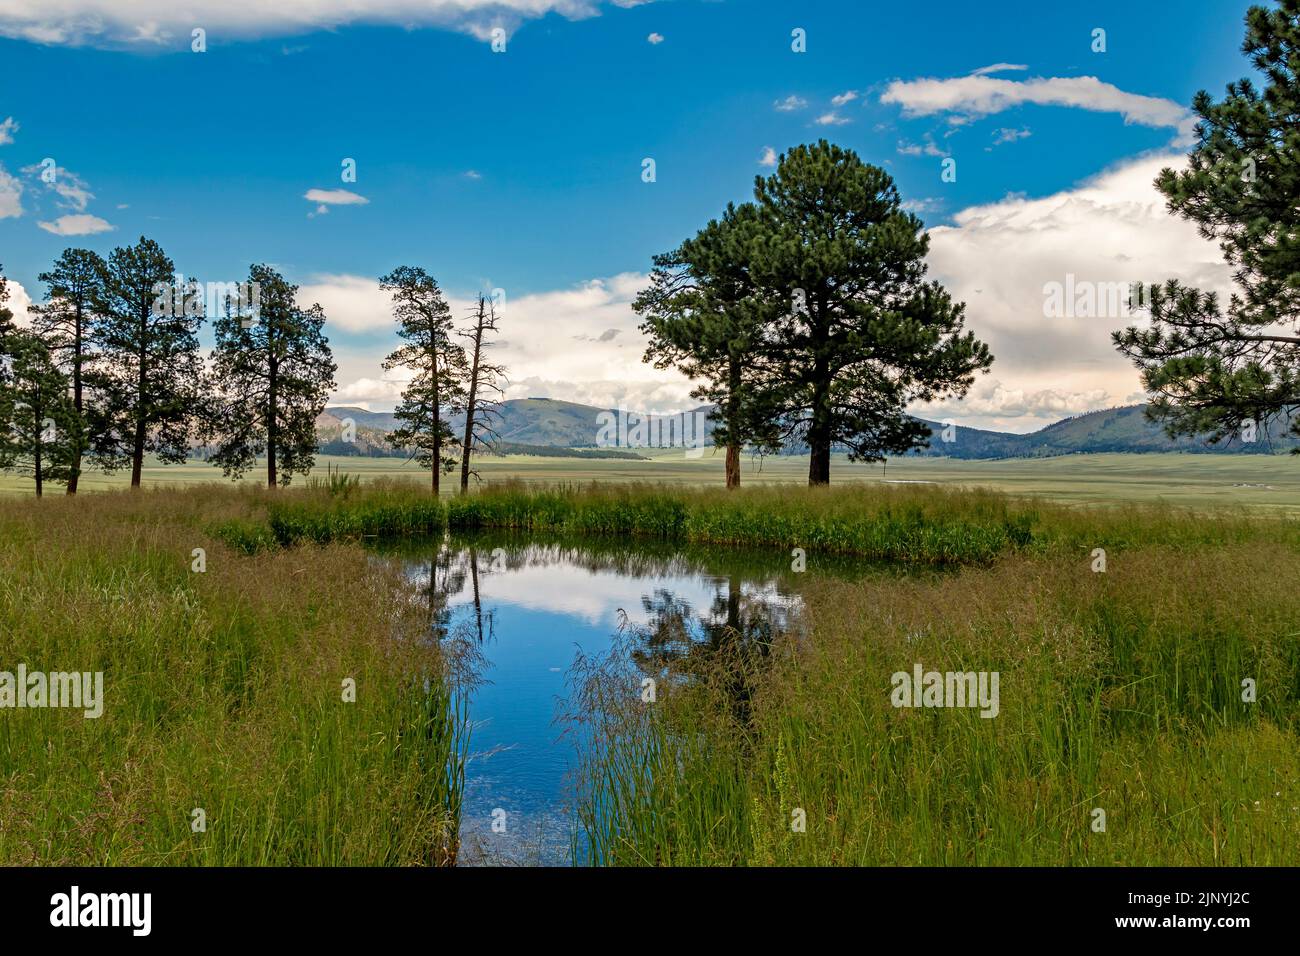 Small Pond In The Valles Caldera National Preserve In New Mexico Stock Photo